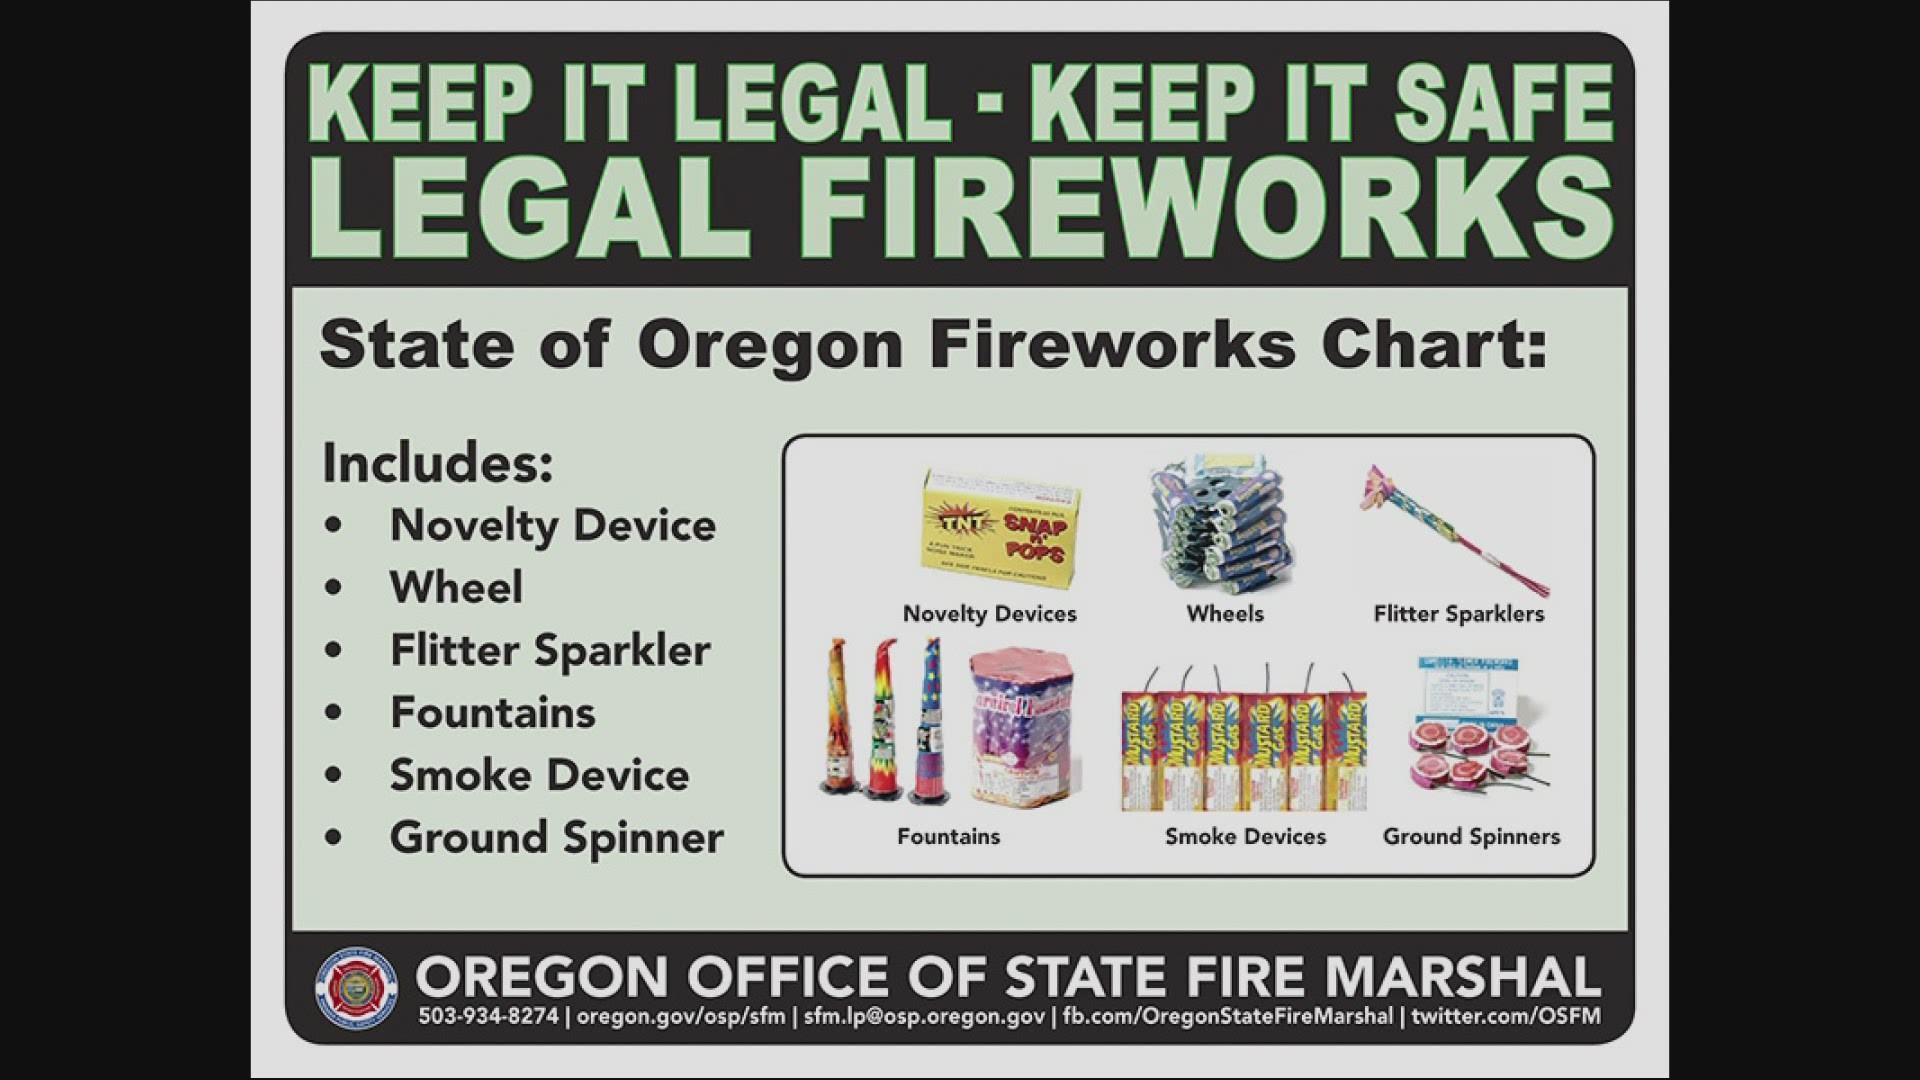 Why don’t we have a statewide ban on fireworks this year? It comes down to how the laws are written.